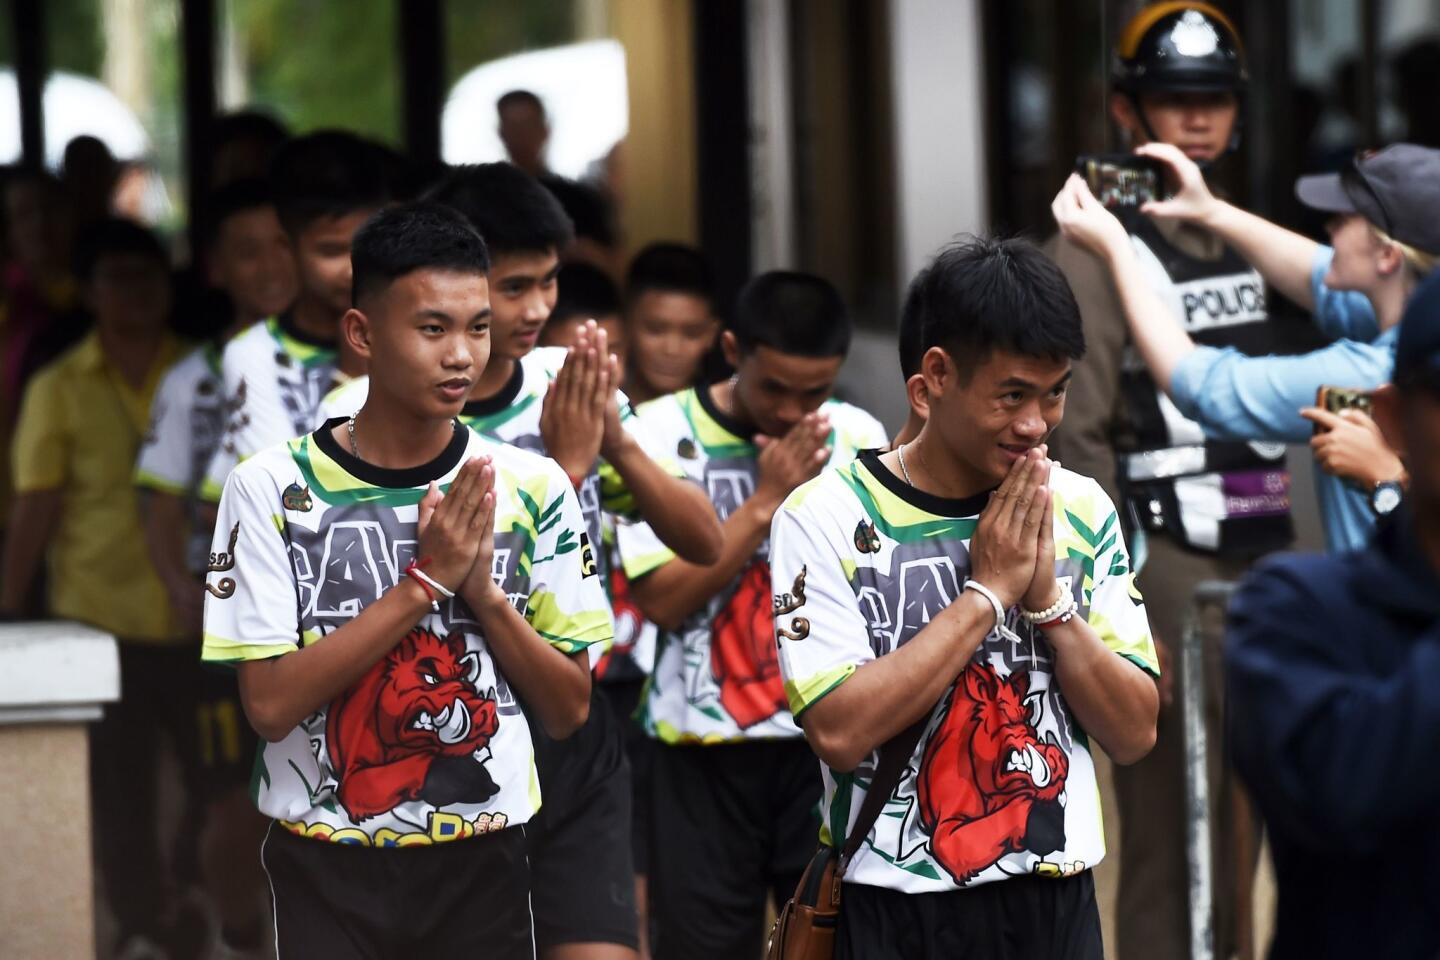 Some of the 12 Thai boys rescued from a flooded cave arrive at a news conference in Chiang Rai on July 18, 2018, following their discharge from the hospital.